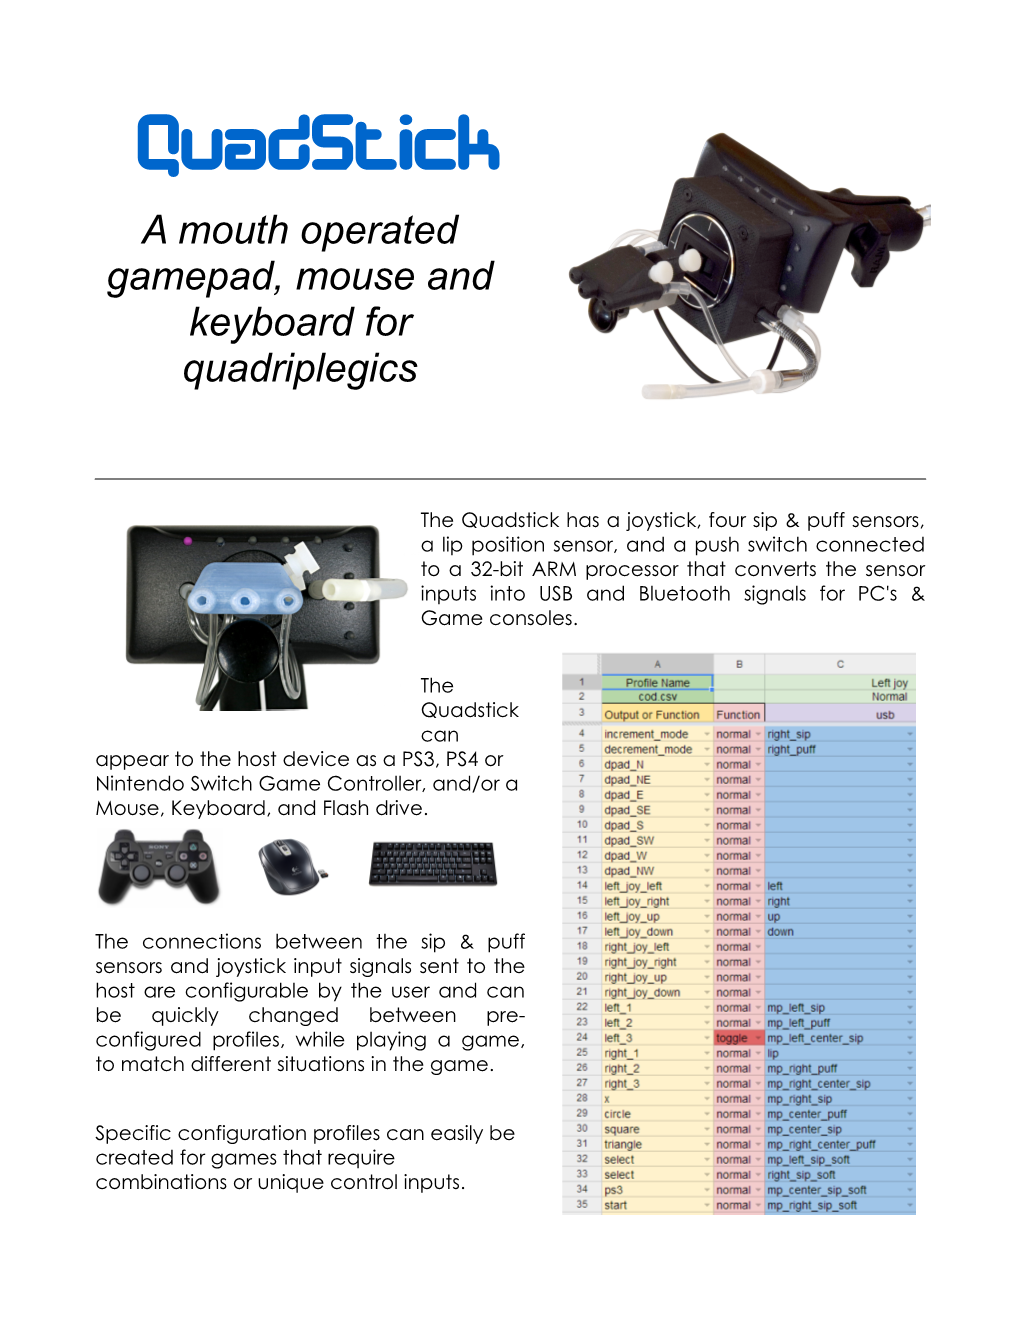 Quadstick a Mouth Operated Gamepad, Mouse and Keyboard for Quadriplegics